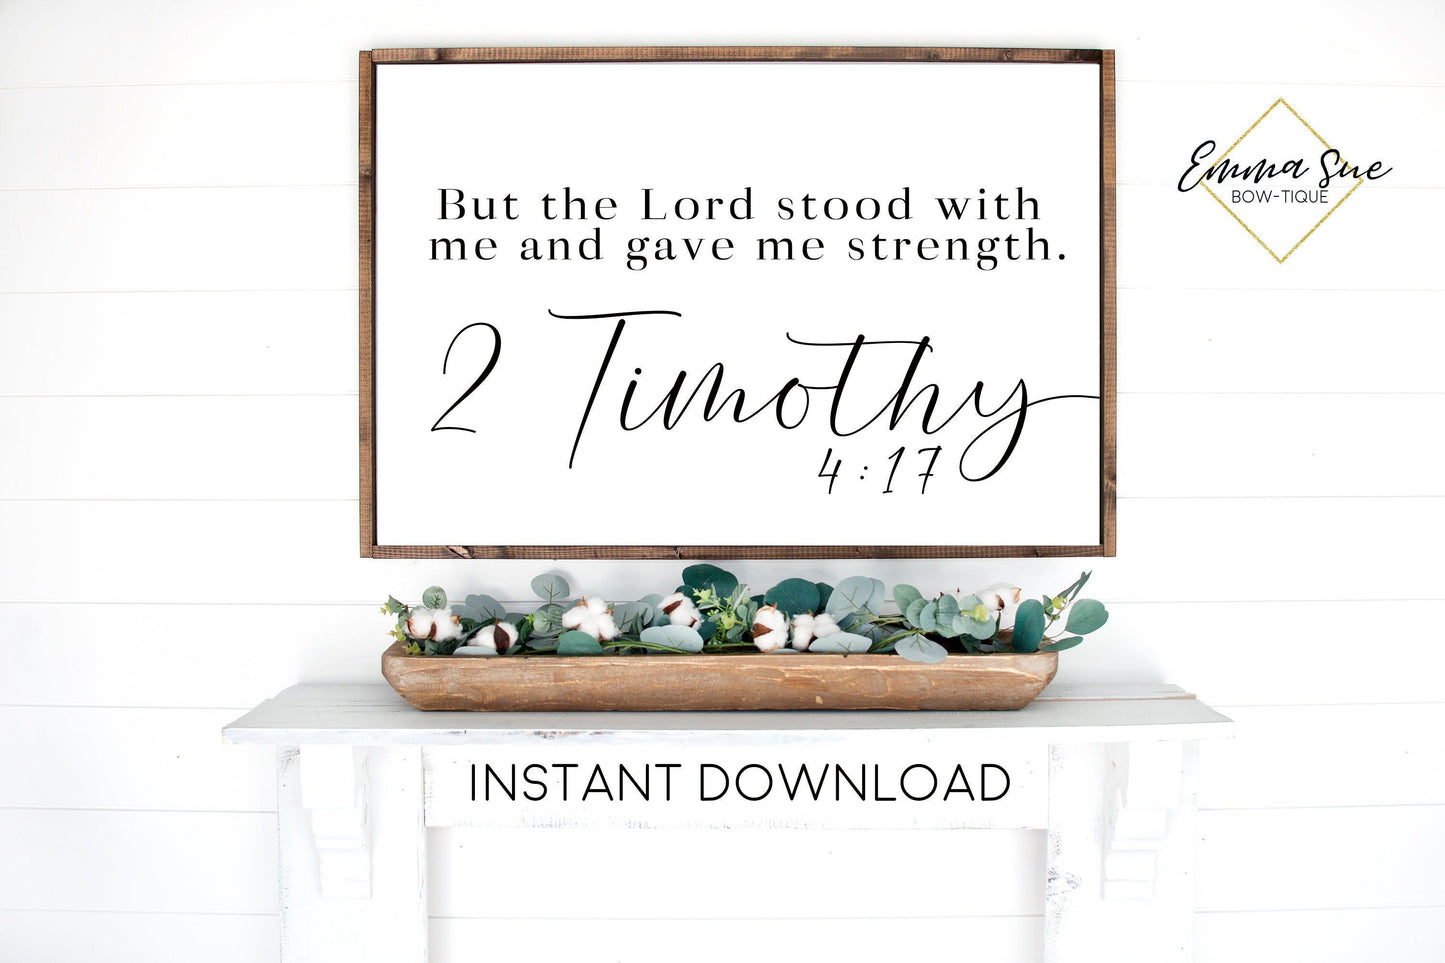 But the Lord stood with me and gave me strength 2 Timothy 4:17 Bible Verse Farmhouse Printable Sign